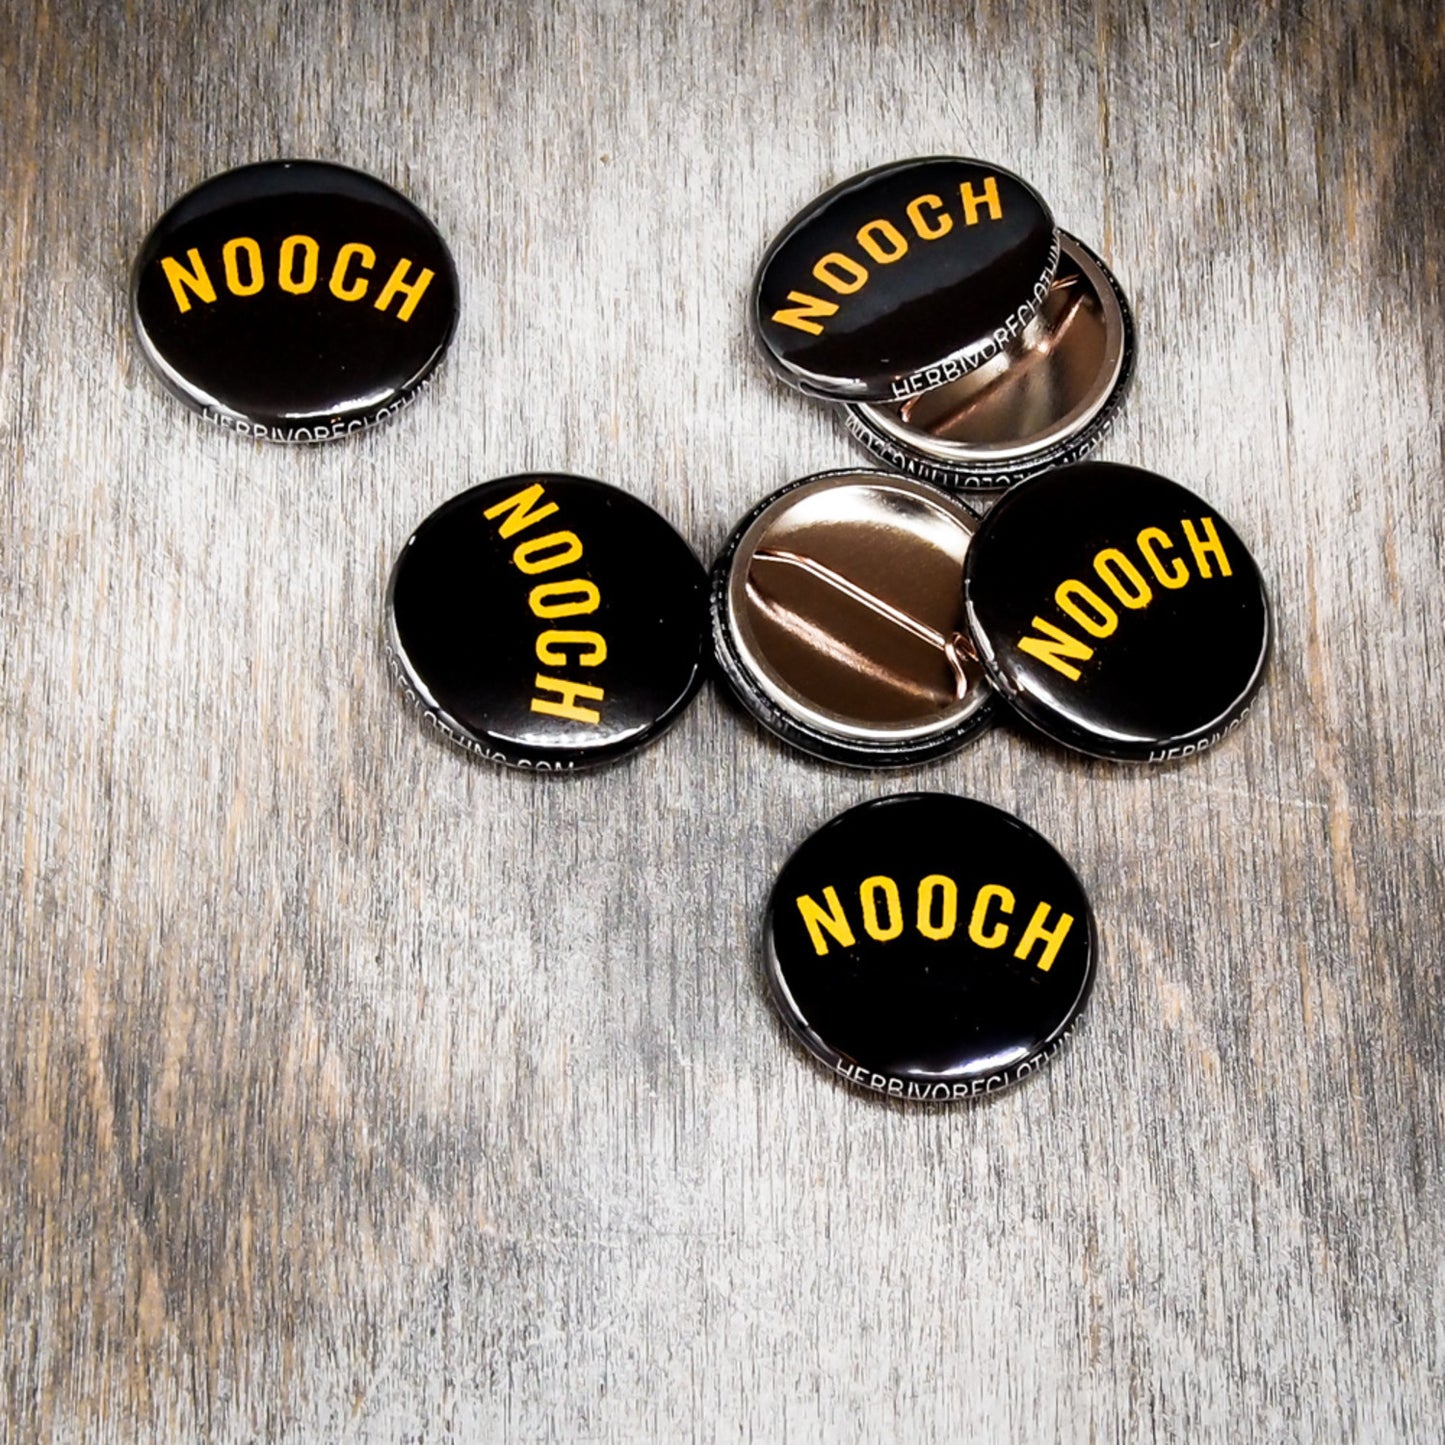 Nooch Unisex Tee (with button)